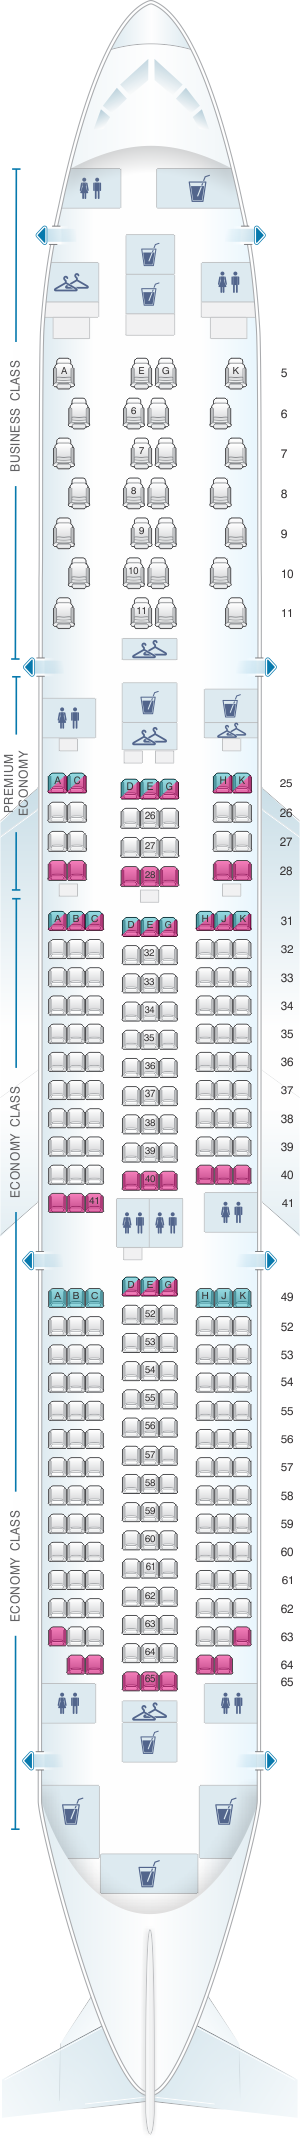 Seat map for China Southern Airlines Boeing B787 9